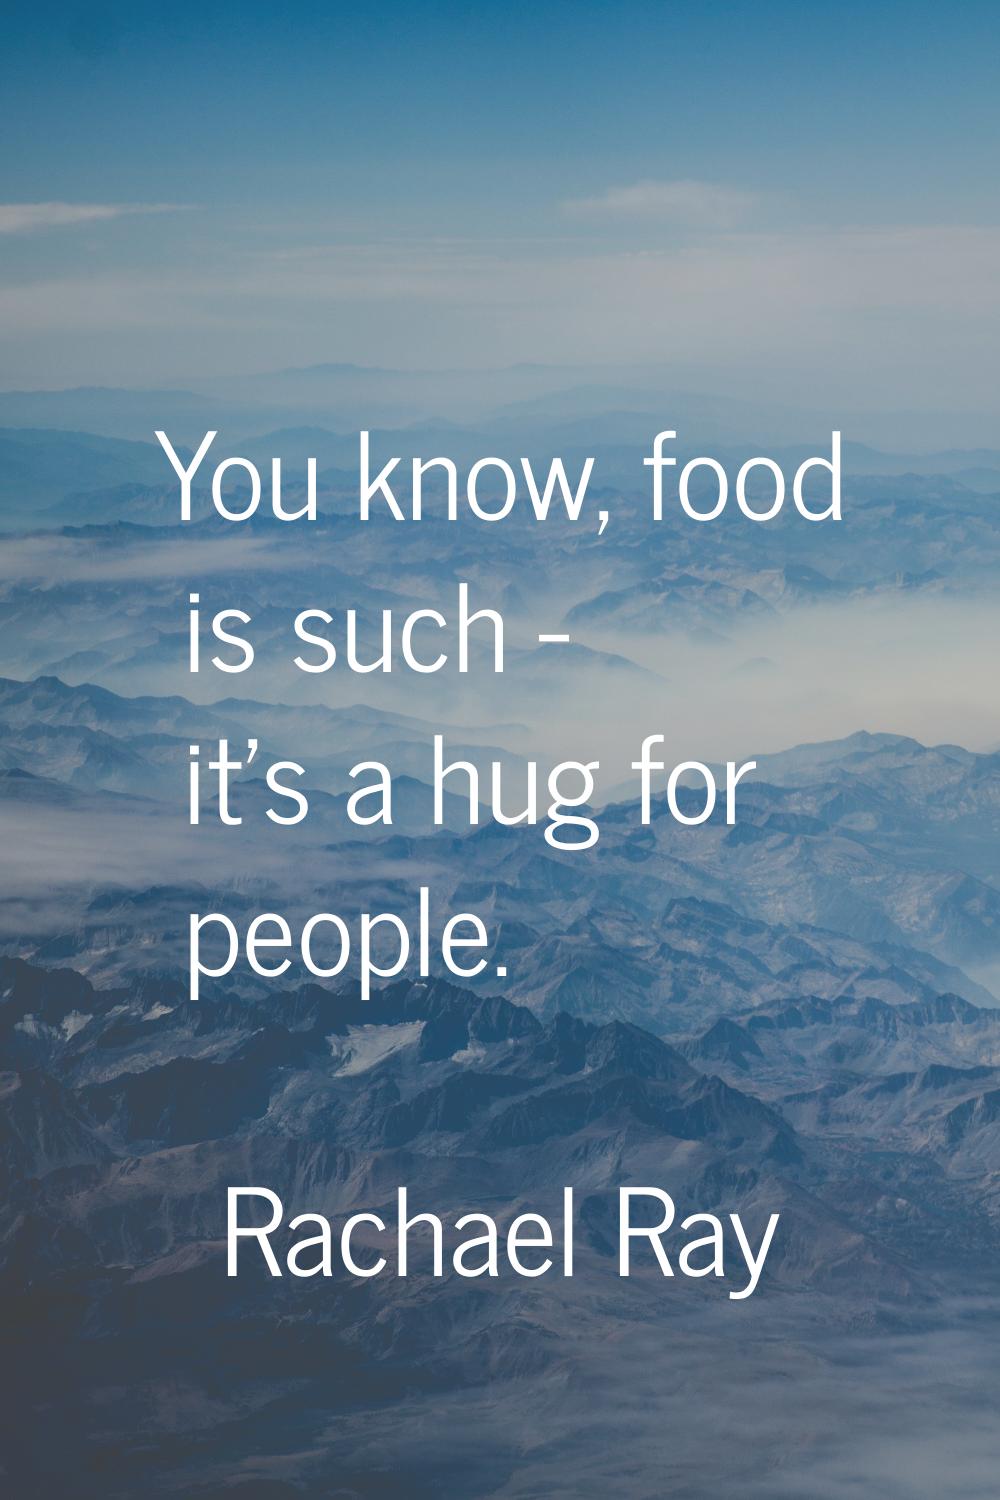 You know, food is such - it's a hug for people.